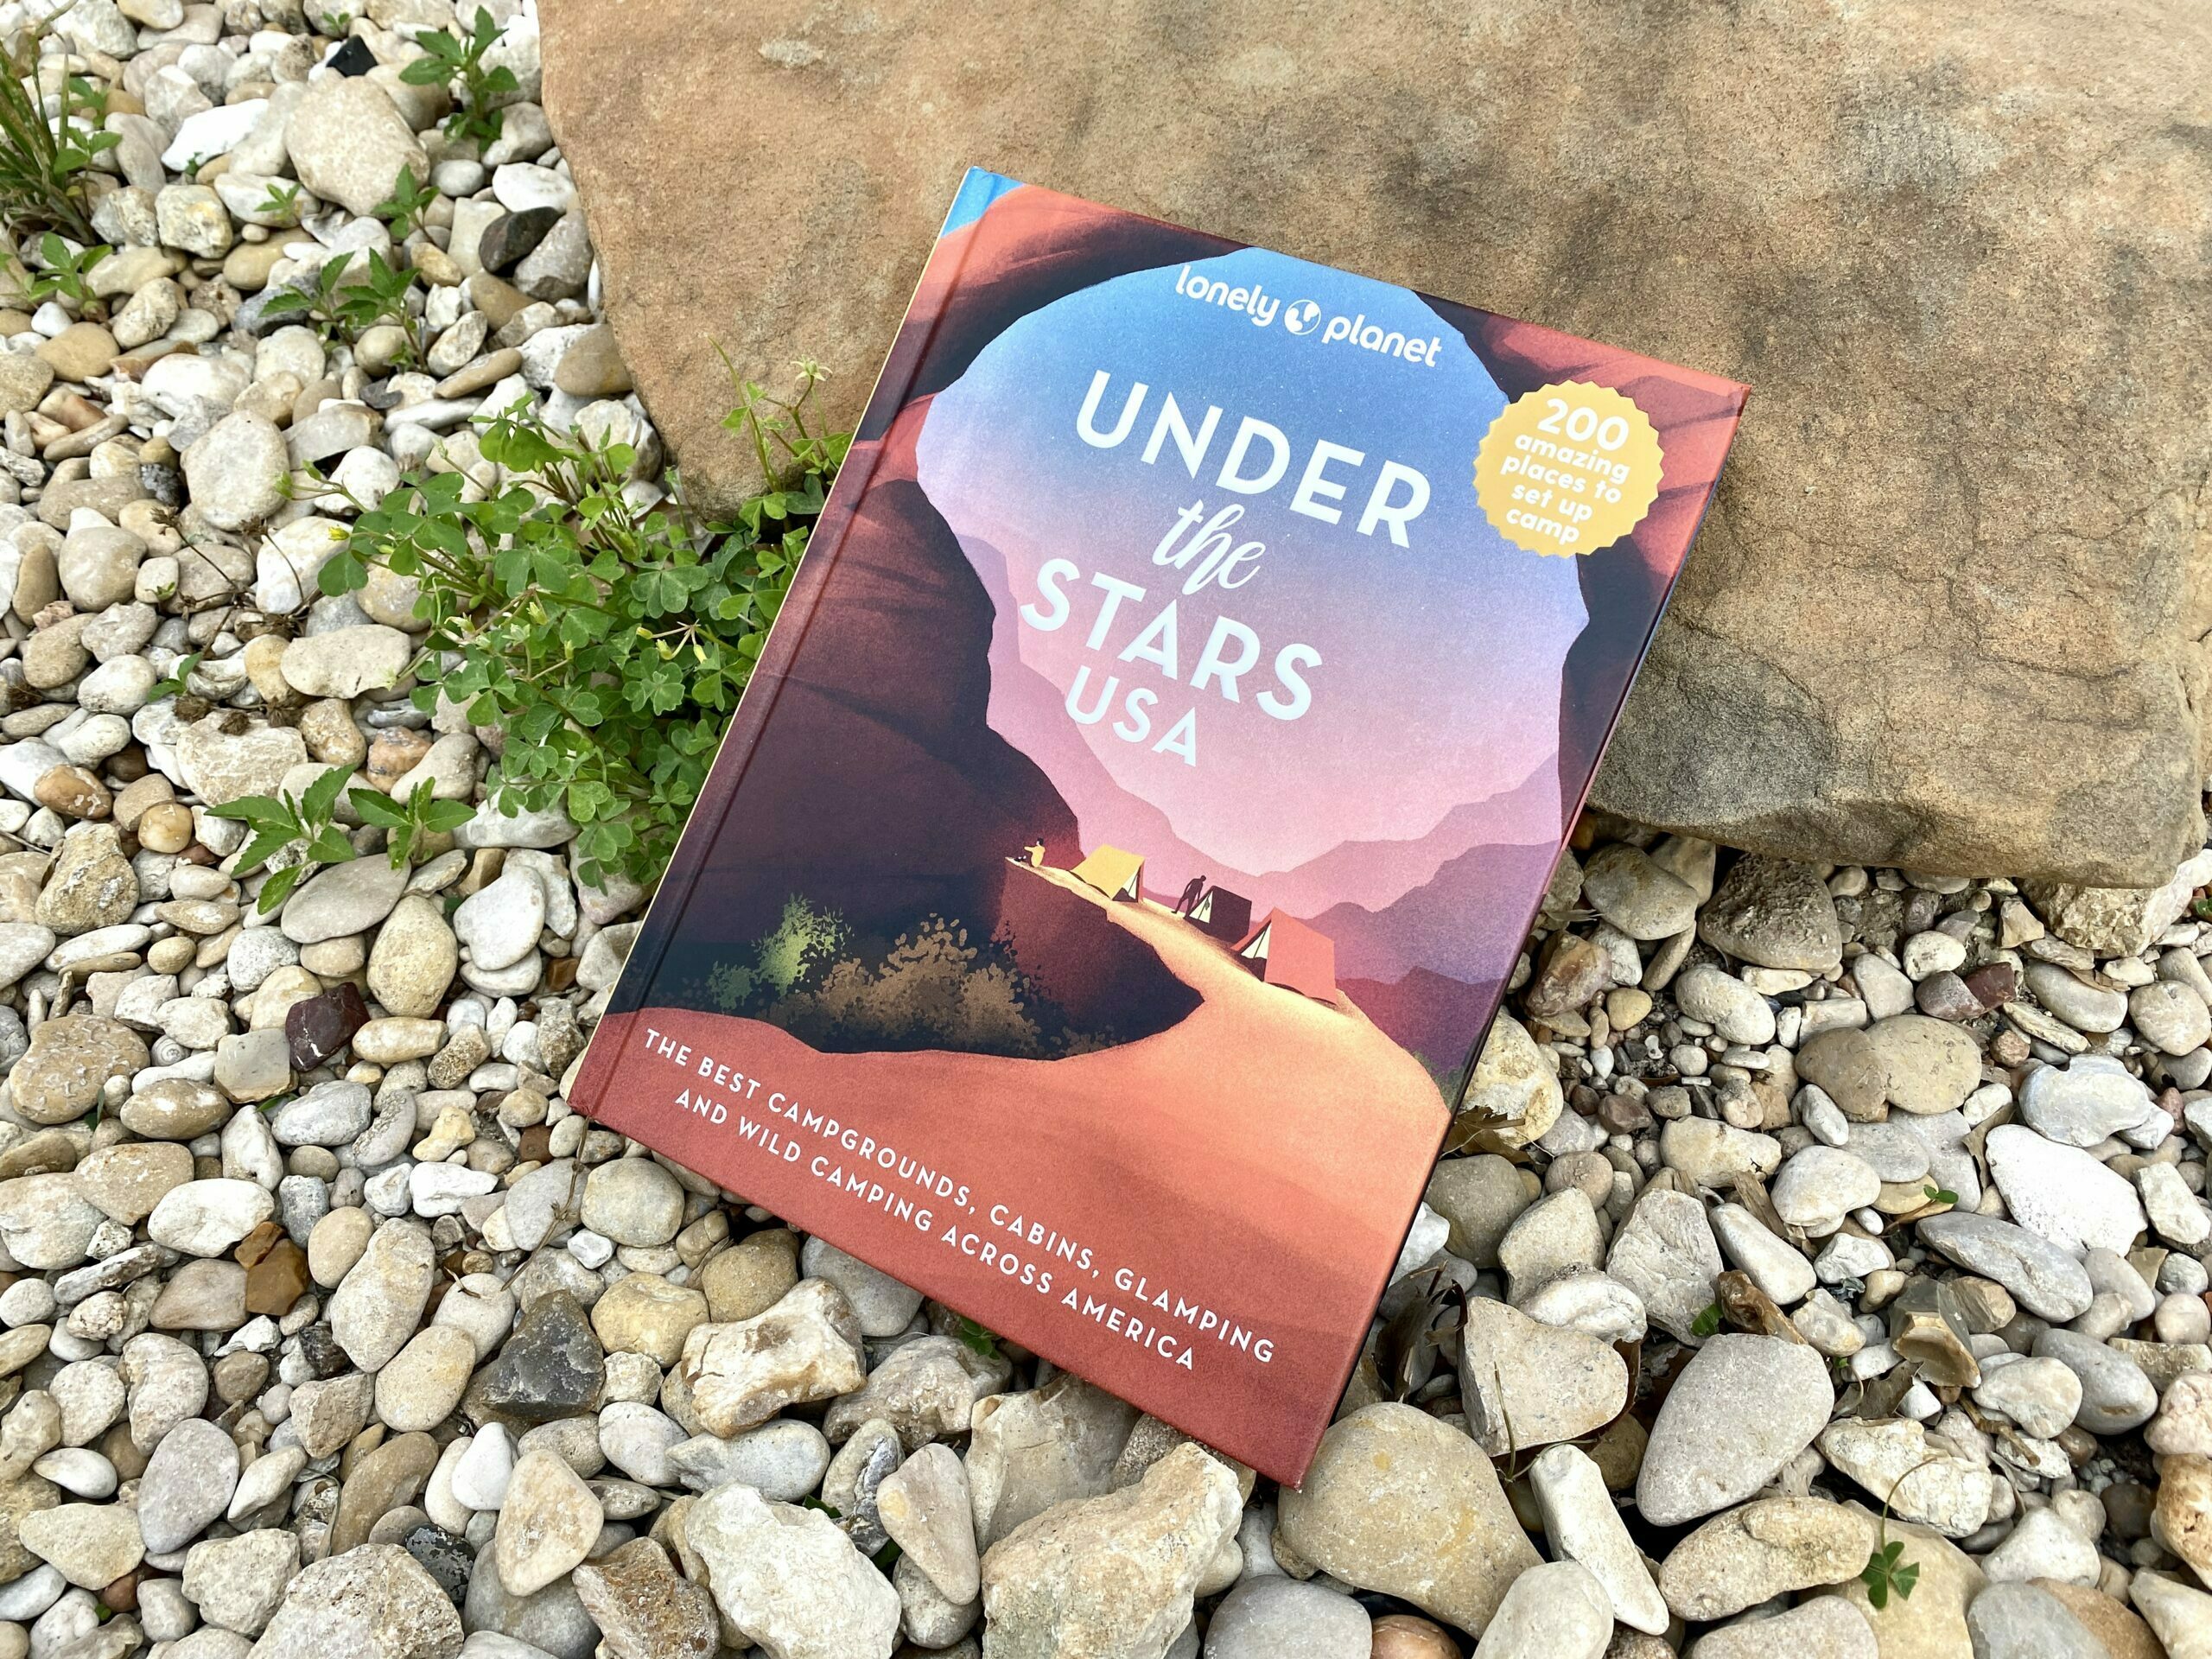 Under the Stars USA book propped up on a rock